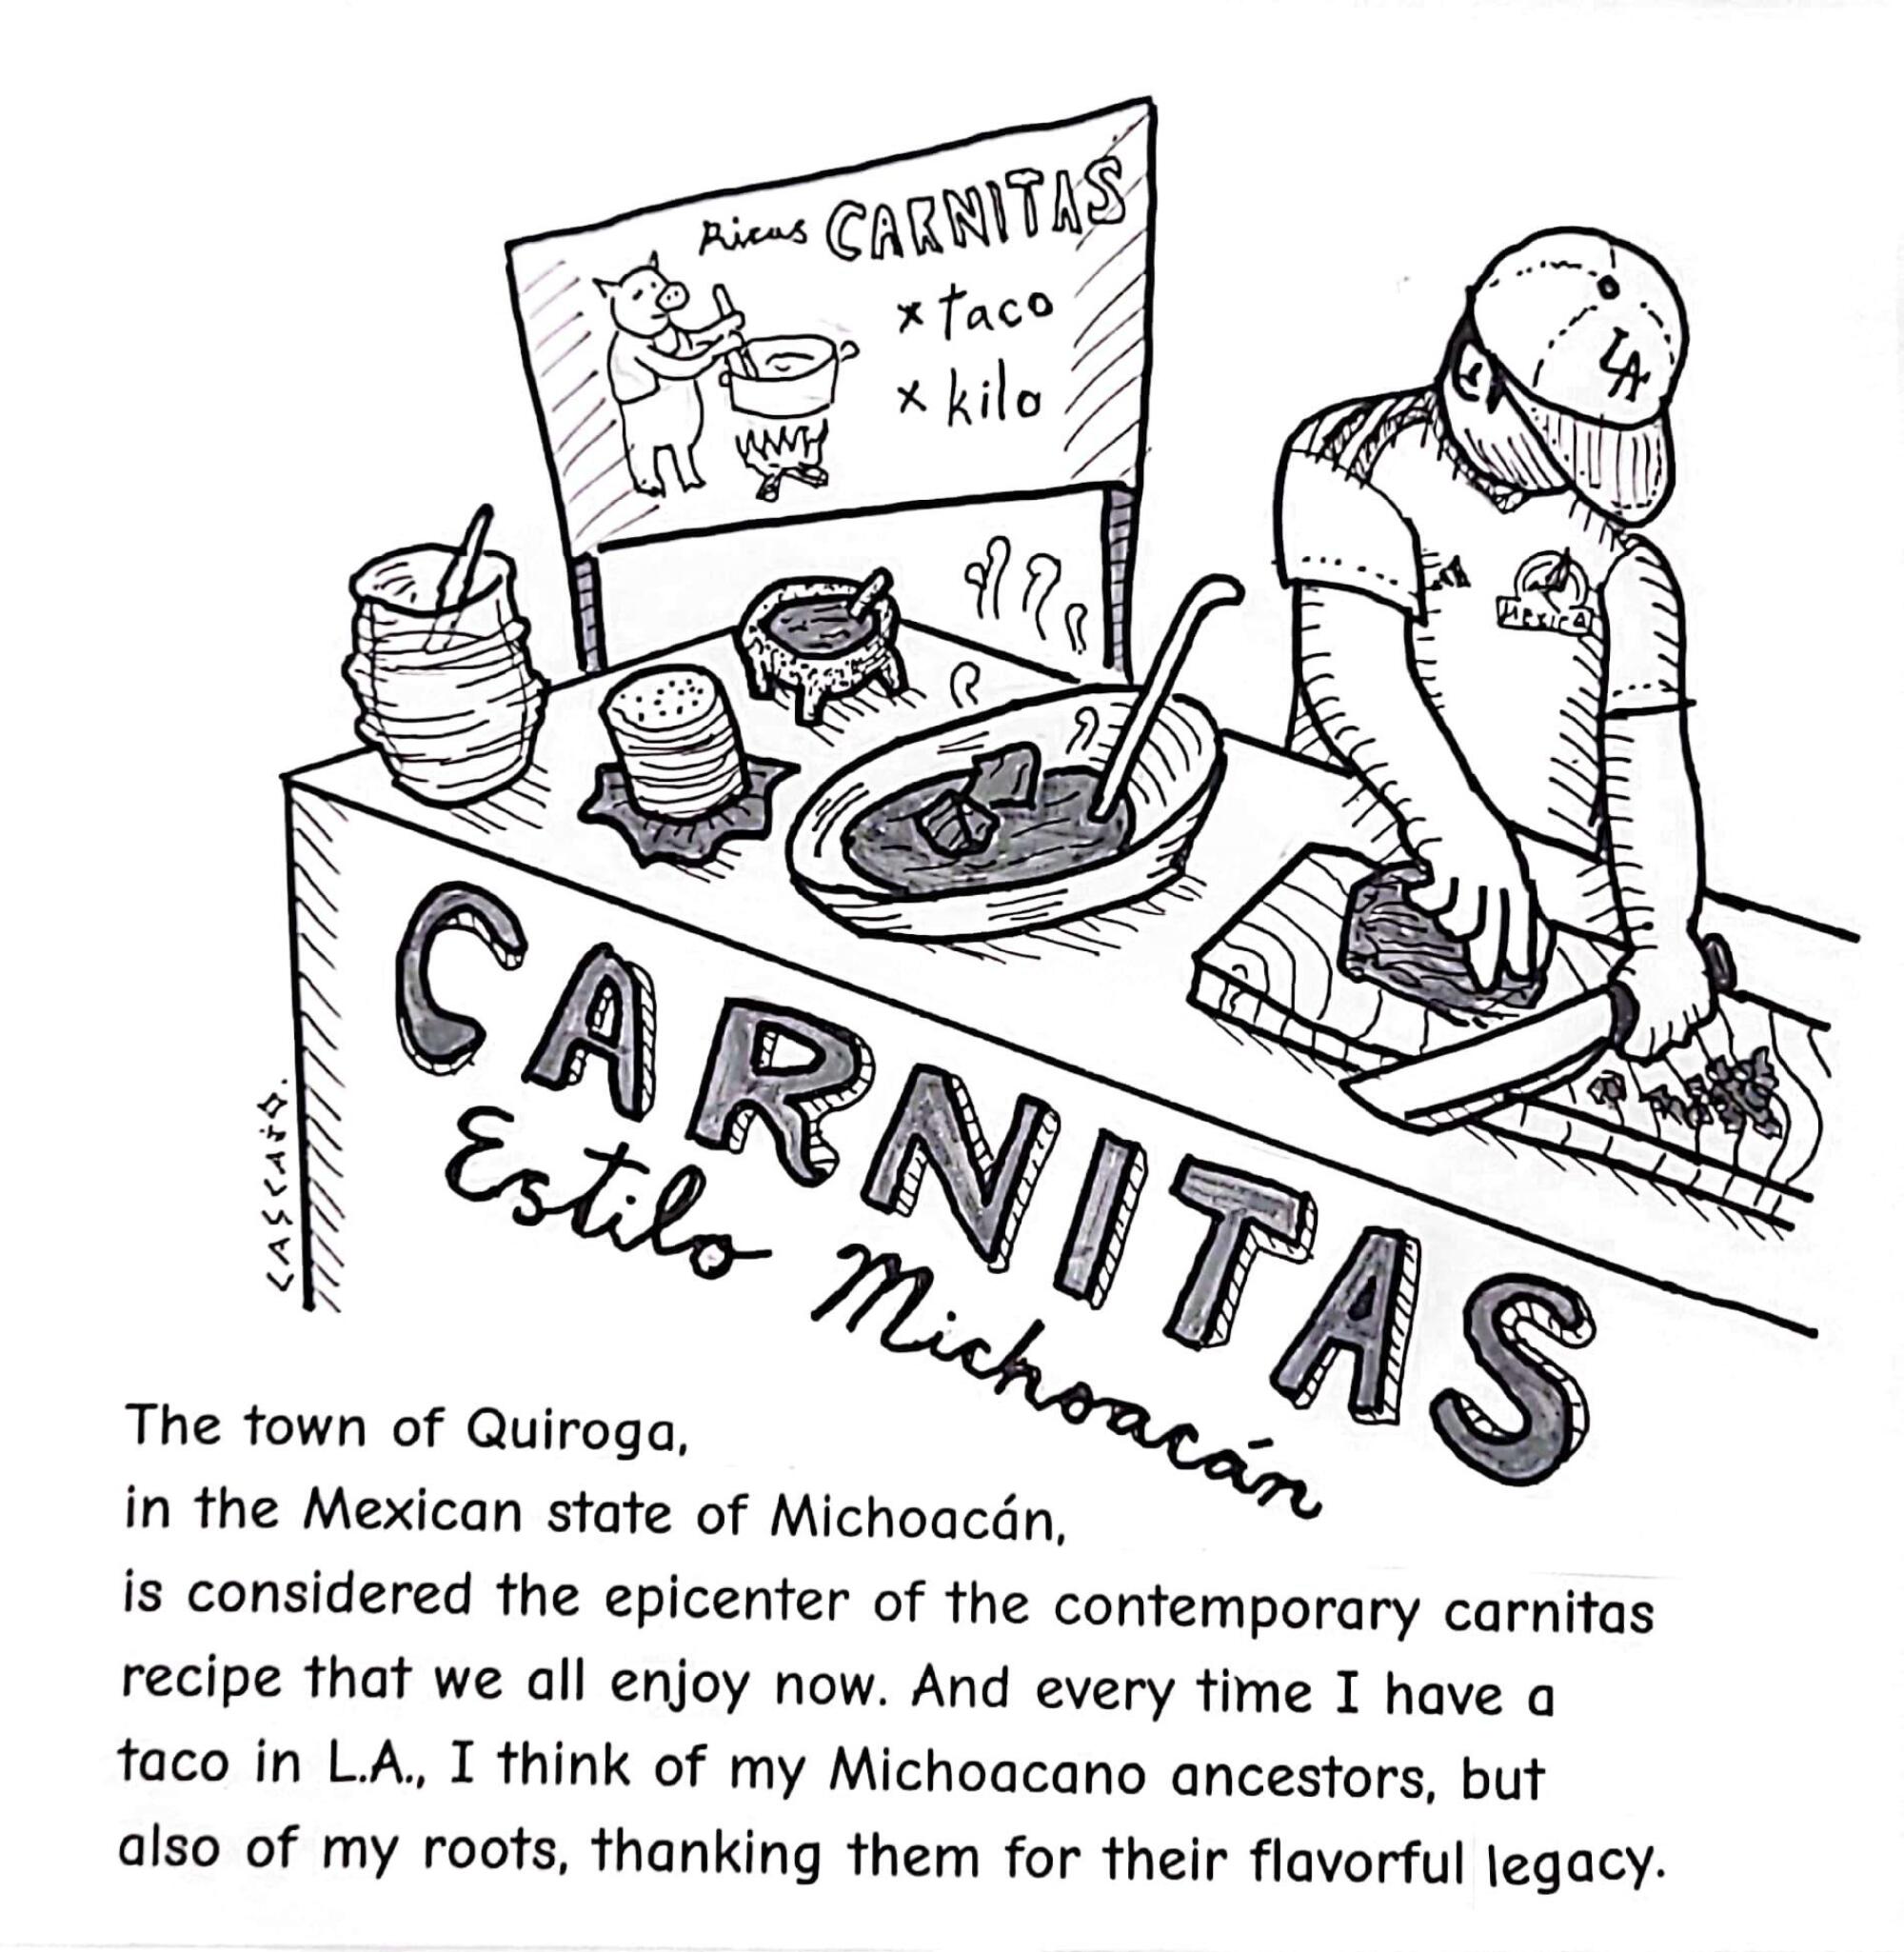 Michoacan is considered the epicenter of the contemporary carnitas recipe that we all enjoy now. 